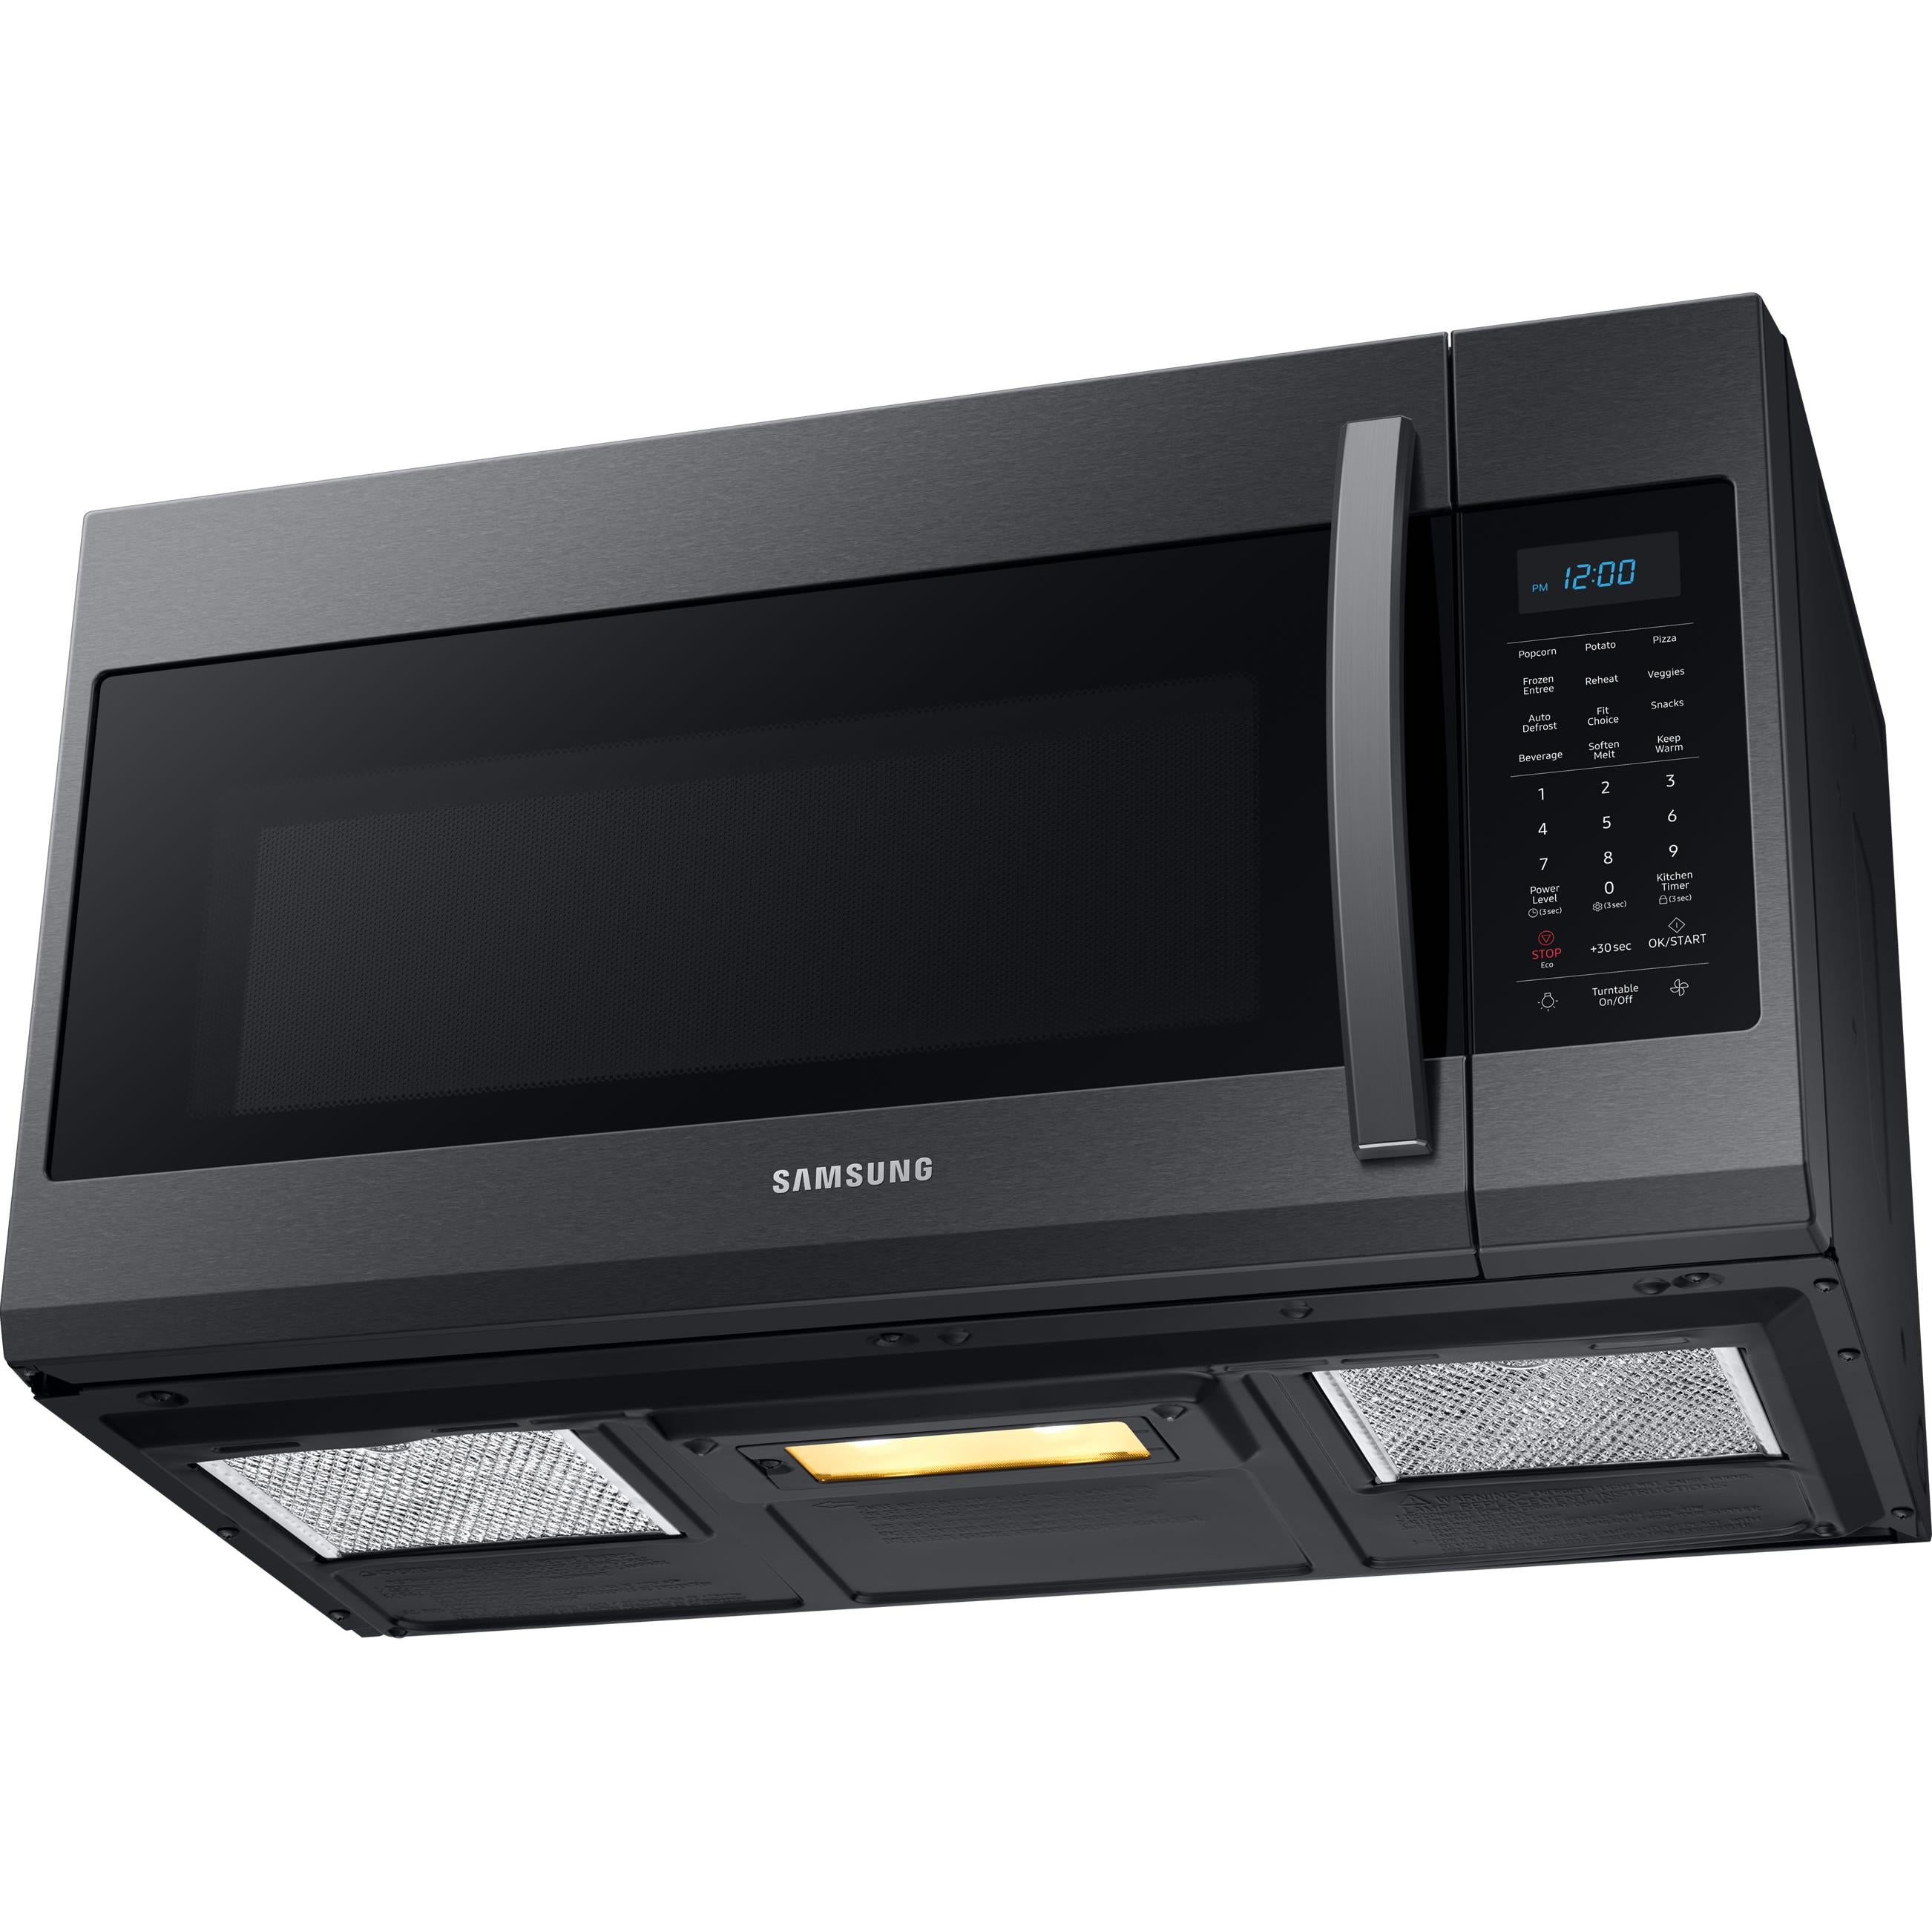 Samsung 30-inch, 1.9 cu.ft. Over-the-Range Microwave Oven with Eco Mode ME19R7041FG/AA